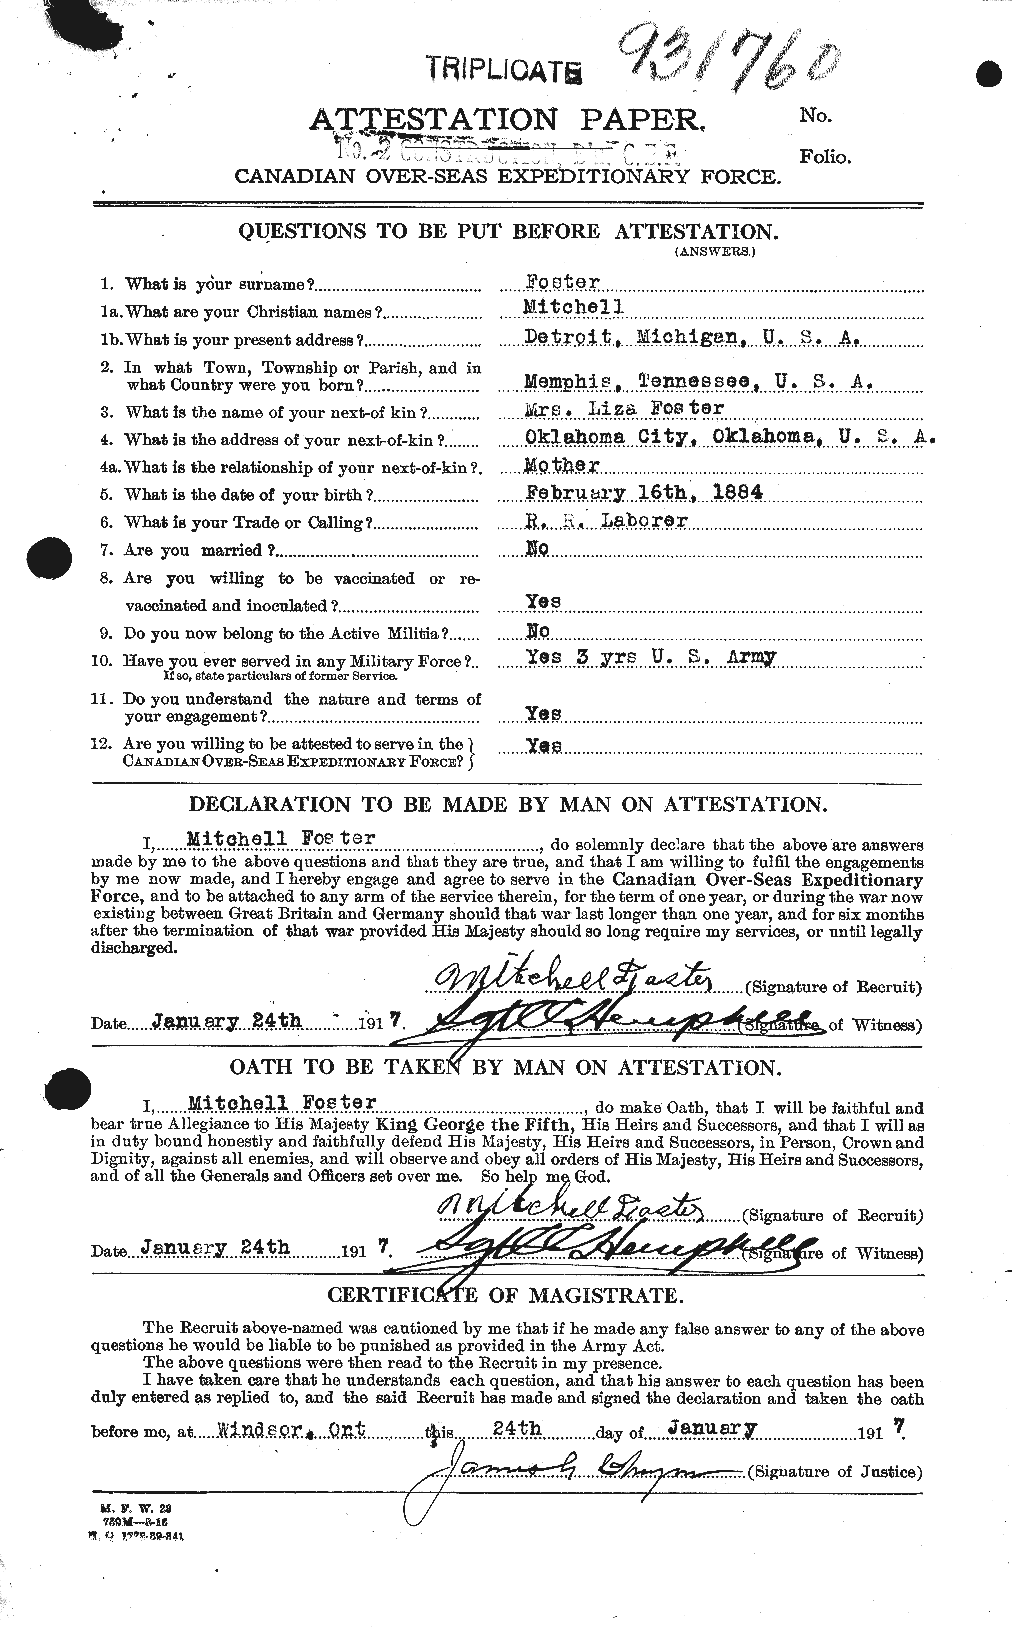 Personnel Records of the First World War - CEF 333429a